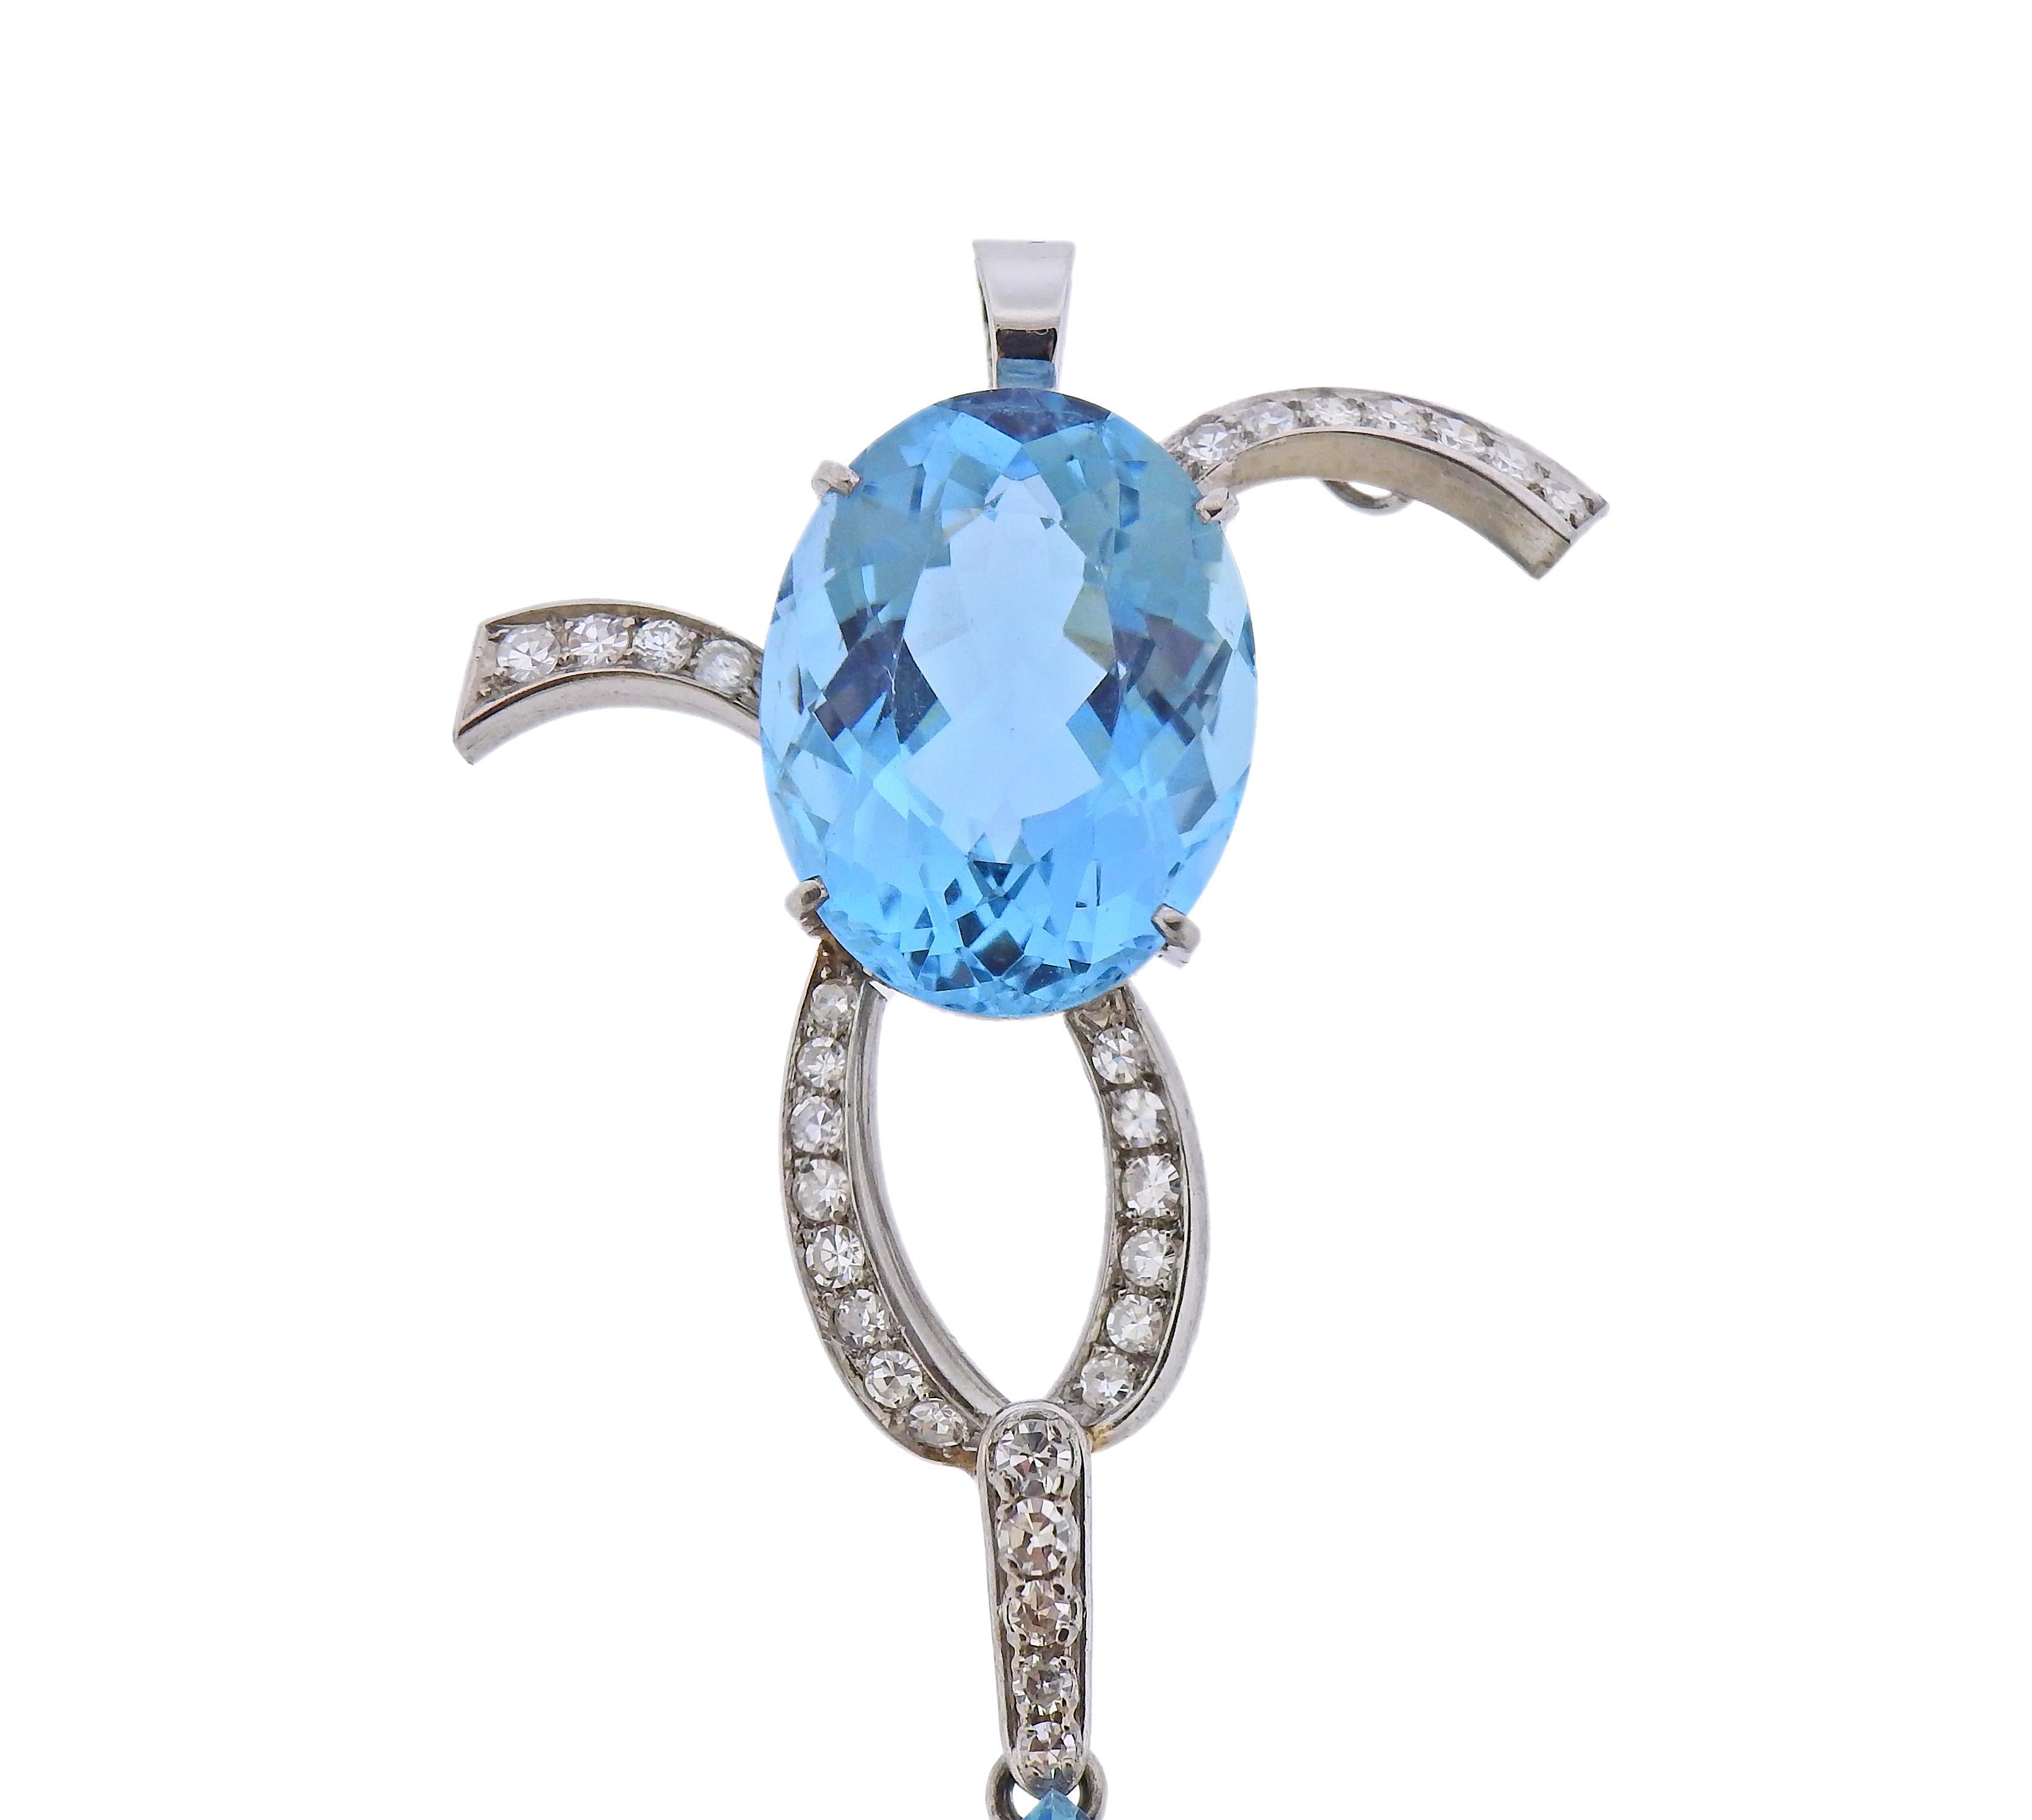 18k white gold pendant drop, set with two aquamarines. Pear shaped stone is approx. 24 carats ( 28 x 16.9 x 10.2mm) , oval stone is approx. 18 carats  (20.2 x 15.8 x 10.3mm) . Diamonds approx. 1 carat in diamonds. Pendant is 77mm long x 39mm wide.